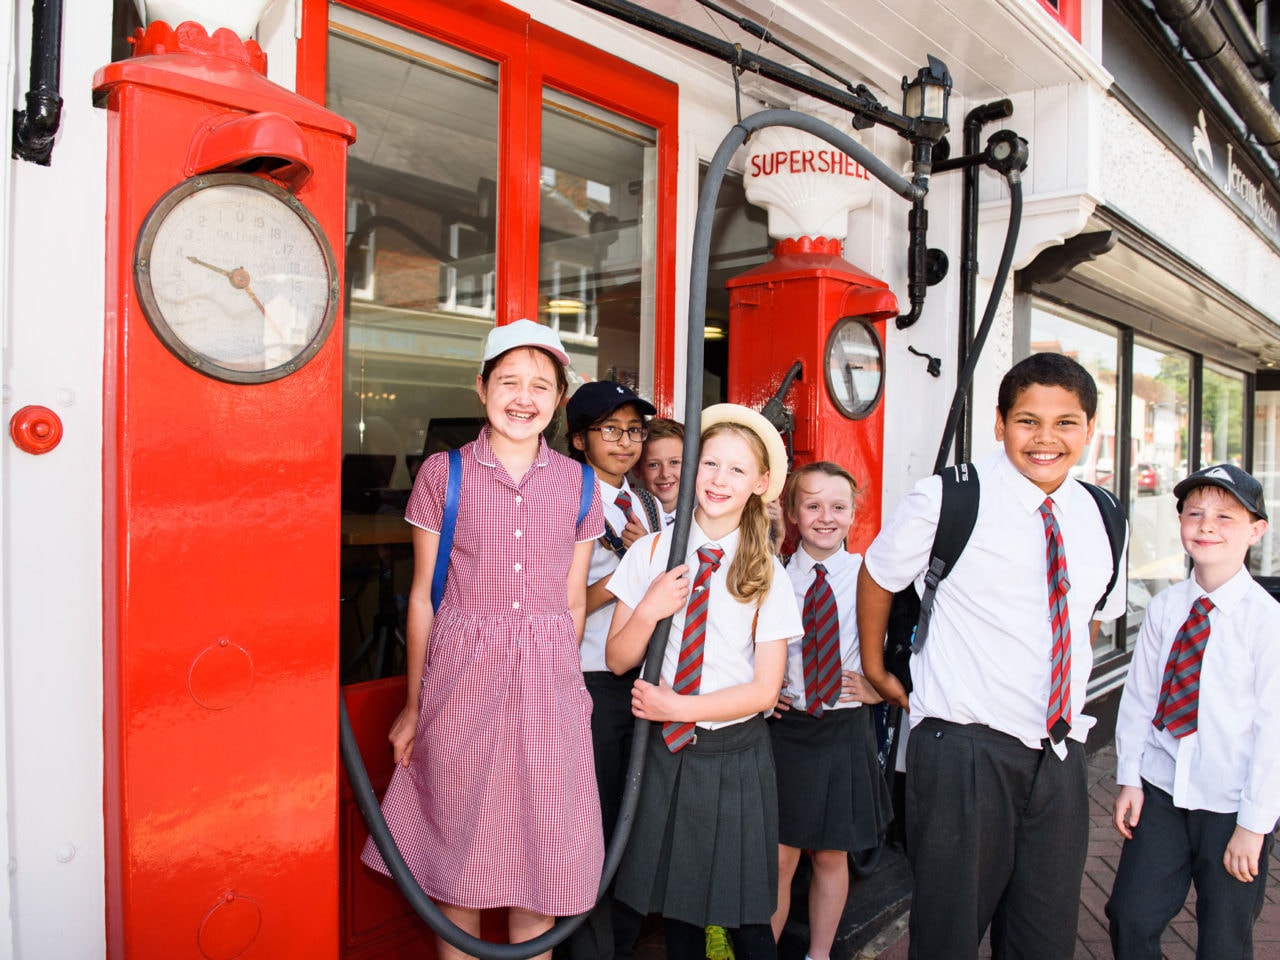 Seven primary school children are standing in a group around an old petrol pump. The bright red pumps have 'Supershell' written on the top. The kids are in school uniform and looking at the camera smiling. It's a nice, sunny day.